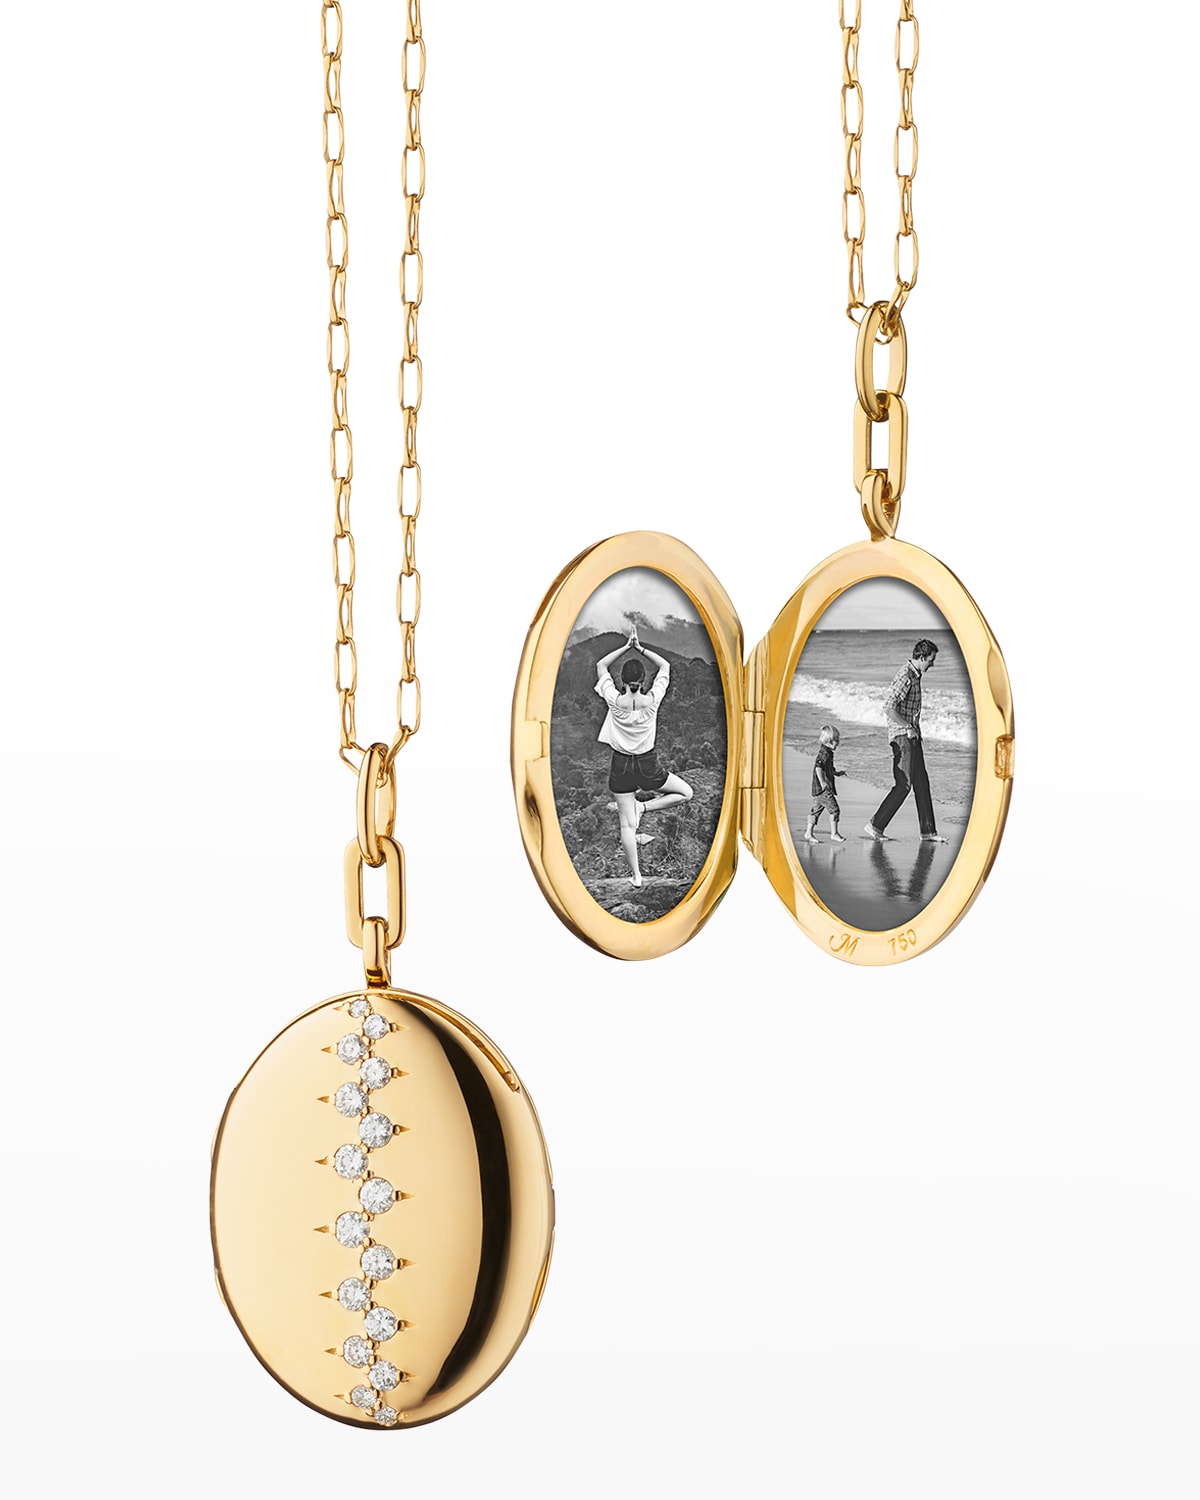 18K Gold Oval Locket Necklace with Scattered Diamonds